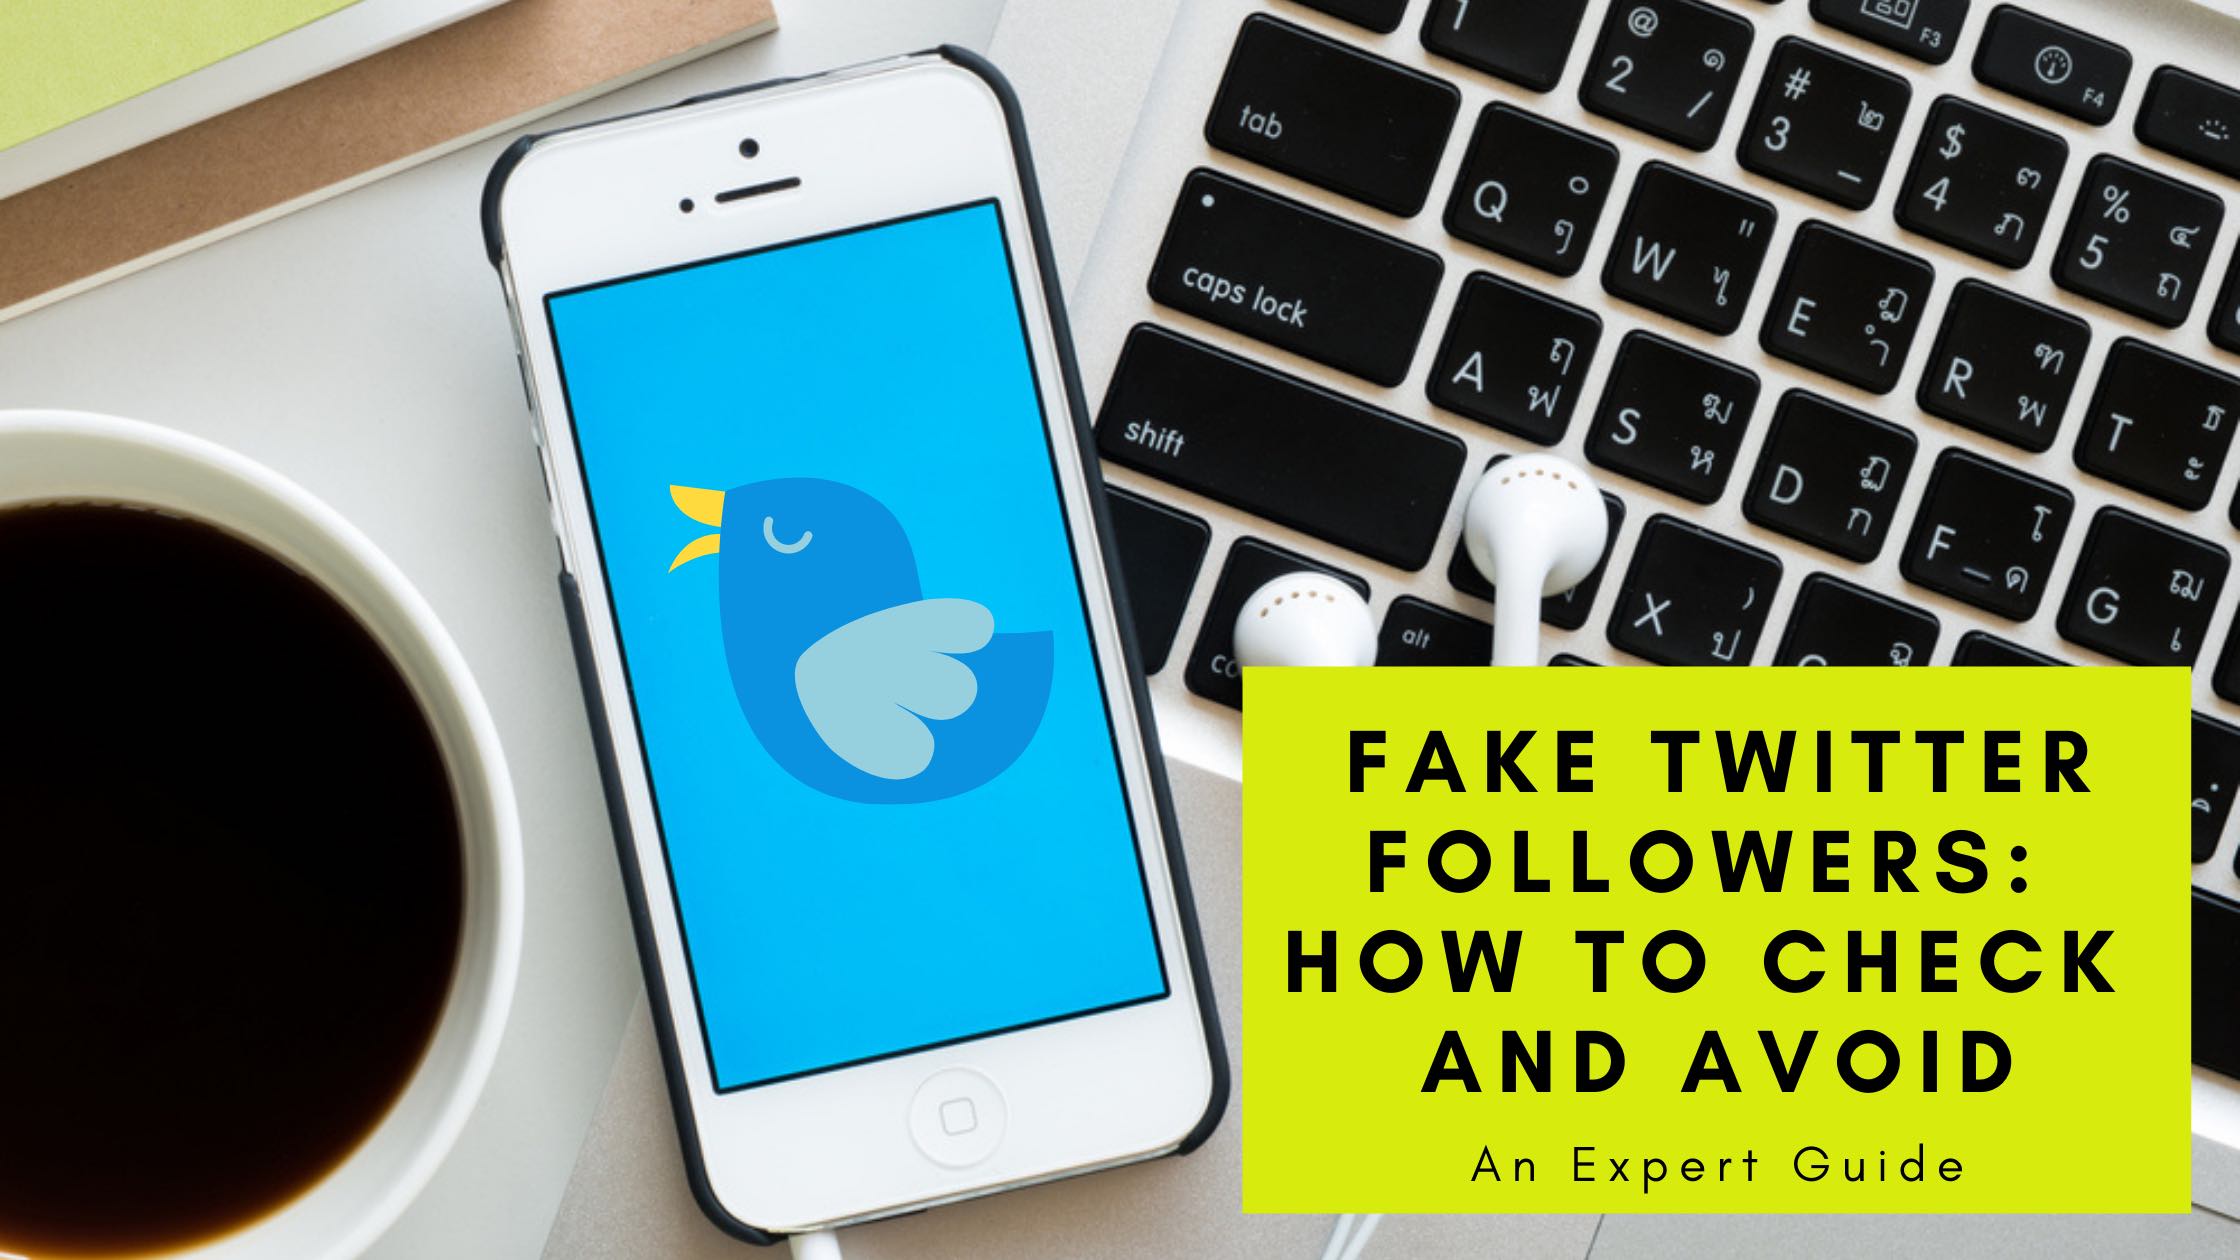 Fake Twitter Followers: How to Check and Avoid (An Expert Guide)